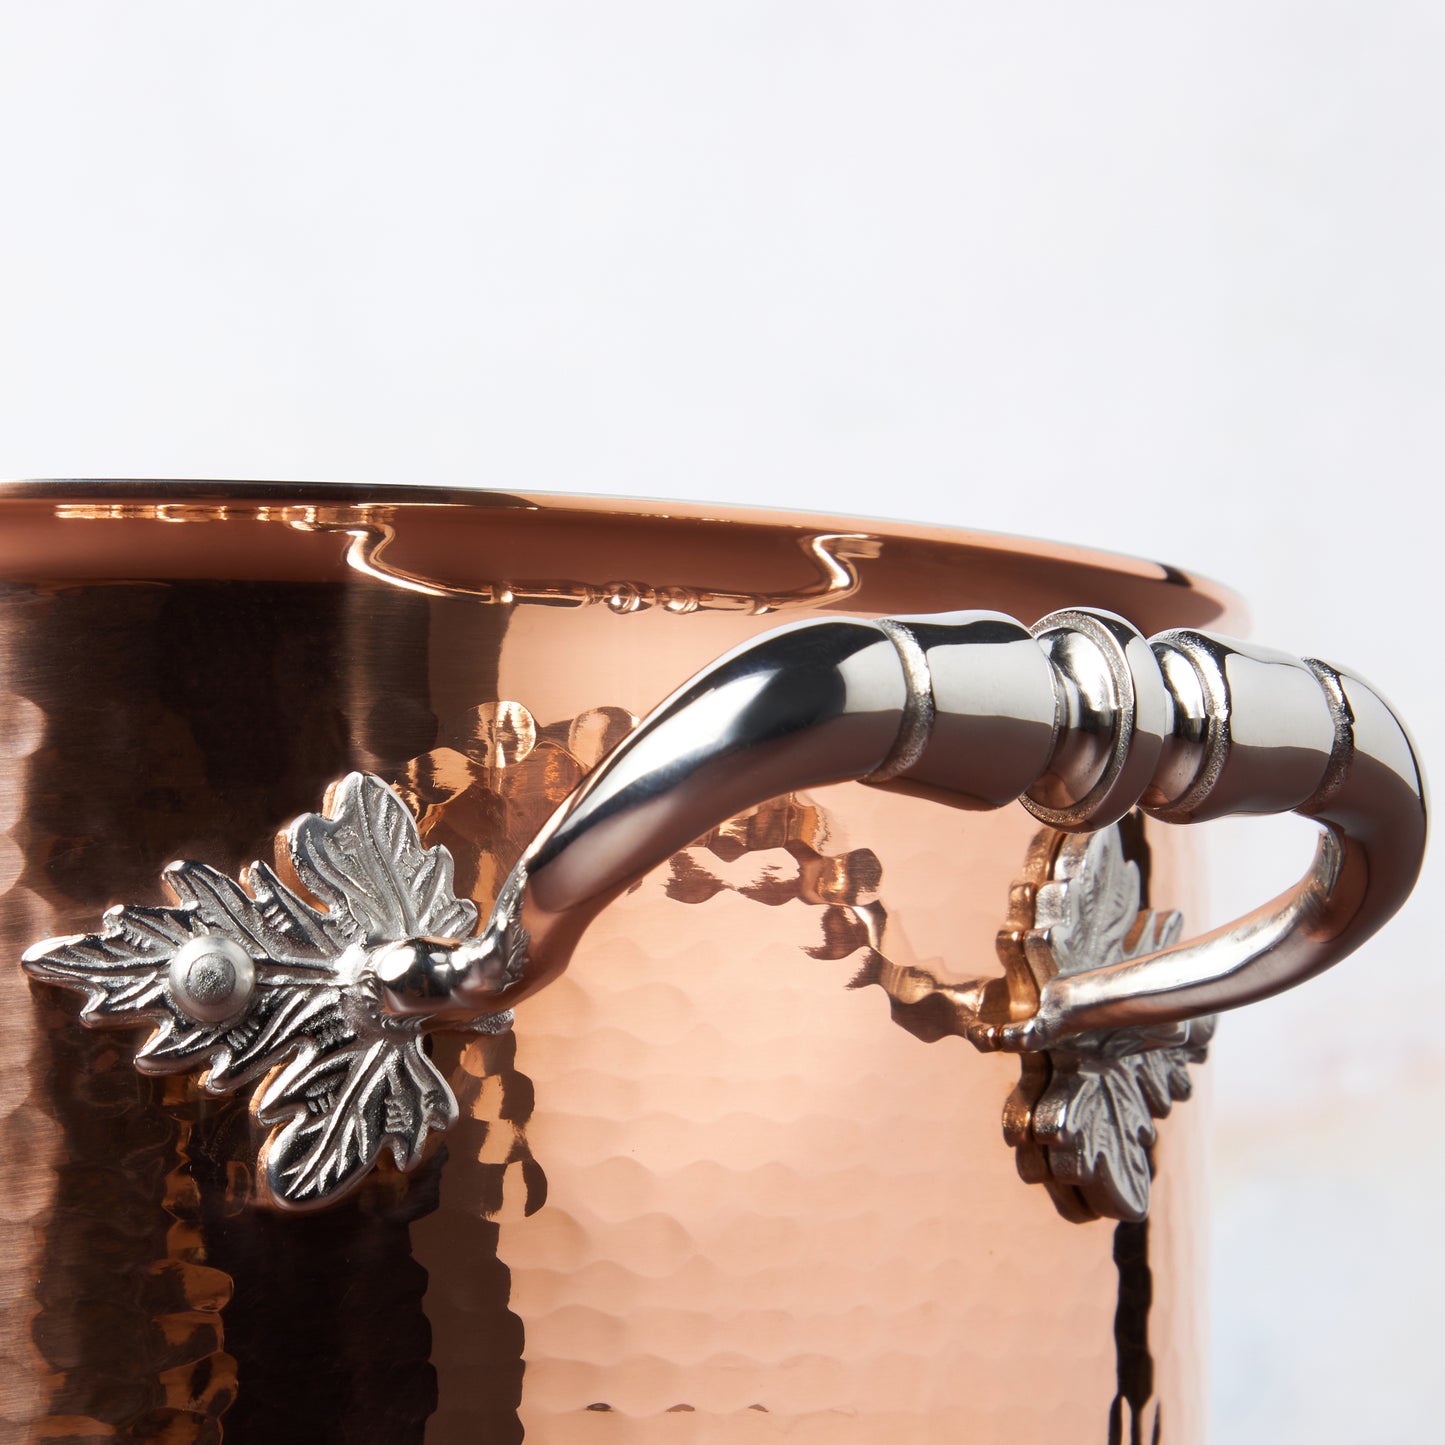 Beautiful stainless steel handle decorated with delicate leaves on Opus Cupra cookware by Ruffoni